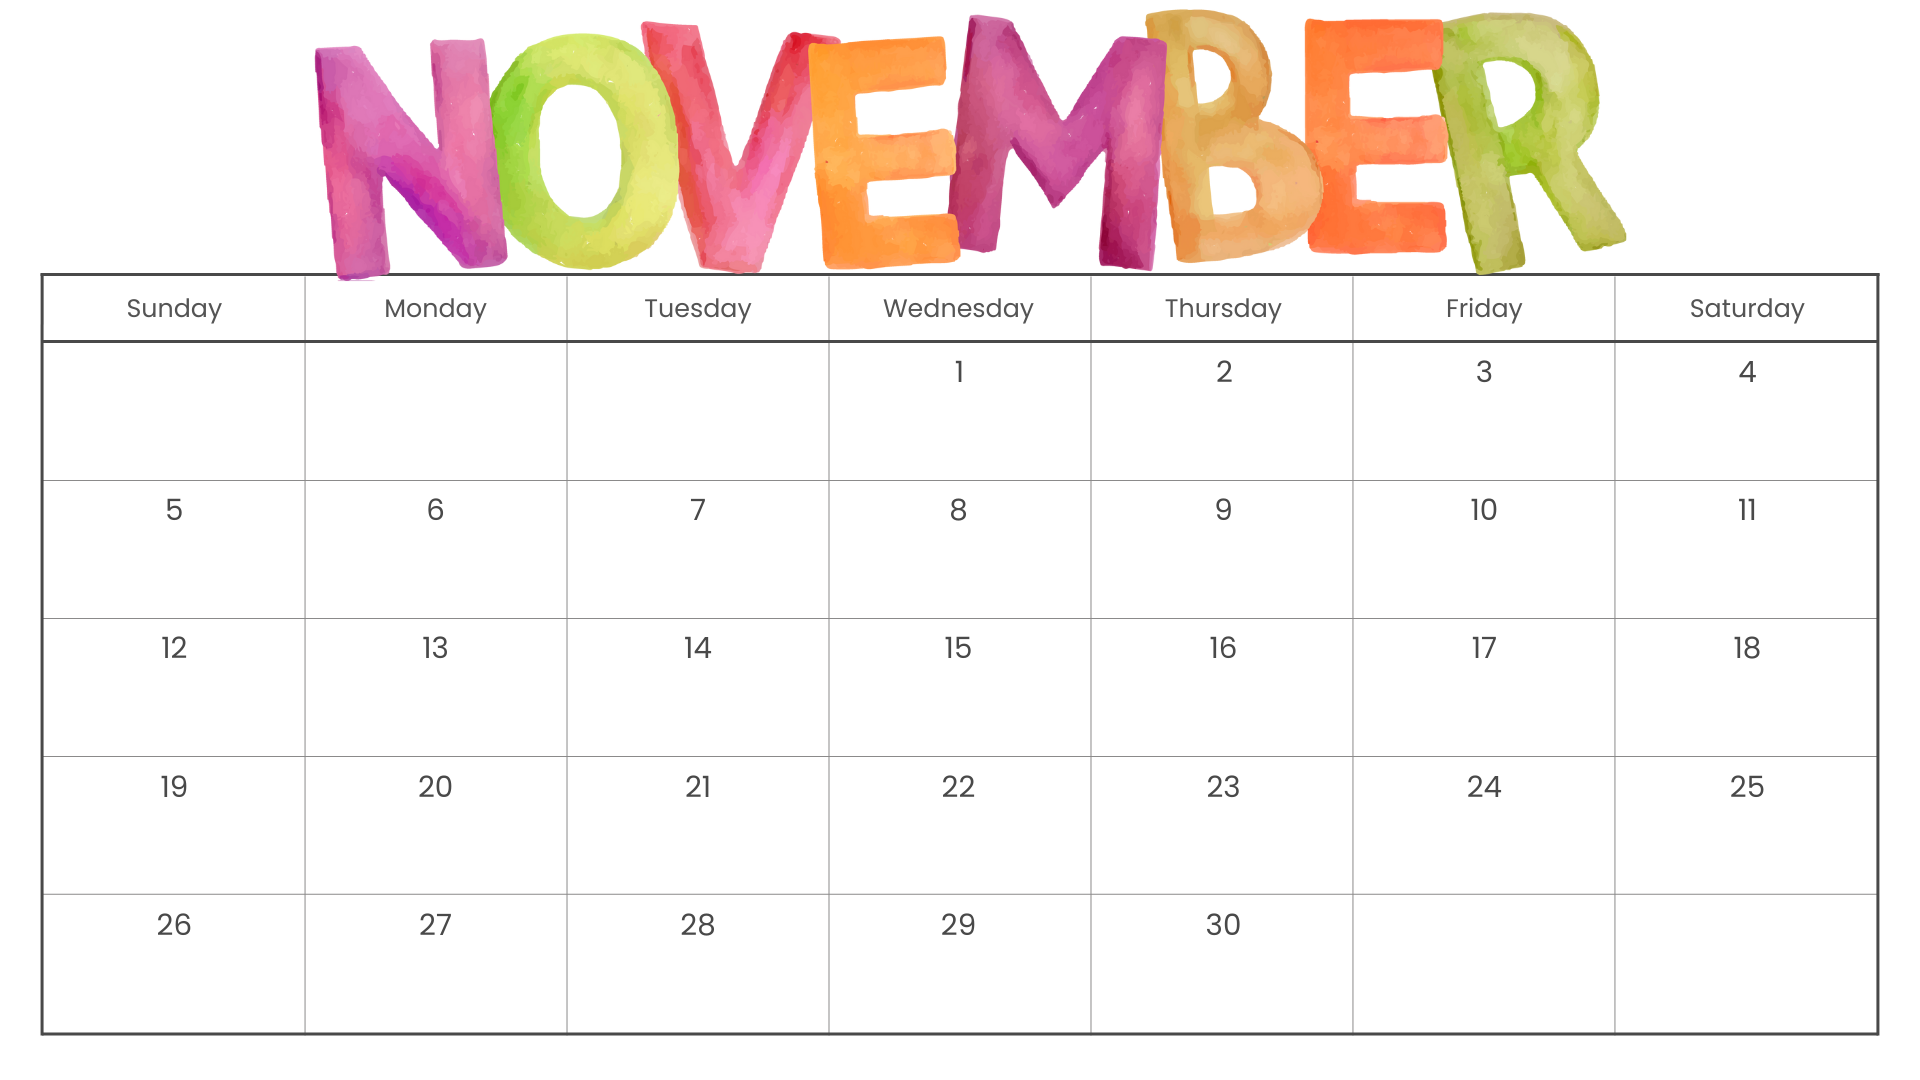 Looking for a free printable November 2023 calendar? Stay organized and plan your month with ease using my downloadable month November cute calendars. Sunday start blank November calendars and planners! Use as work or school calendars.Looking for a free printable November 2023 calendar? Stay organized and plan your month with ease using my downloadable month November cute calendars. Sunday start blank November calendars and planners! Use as work or school calendars.